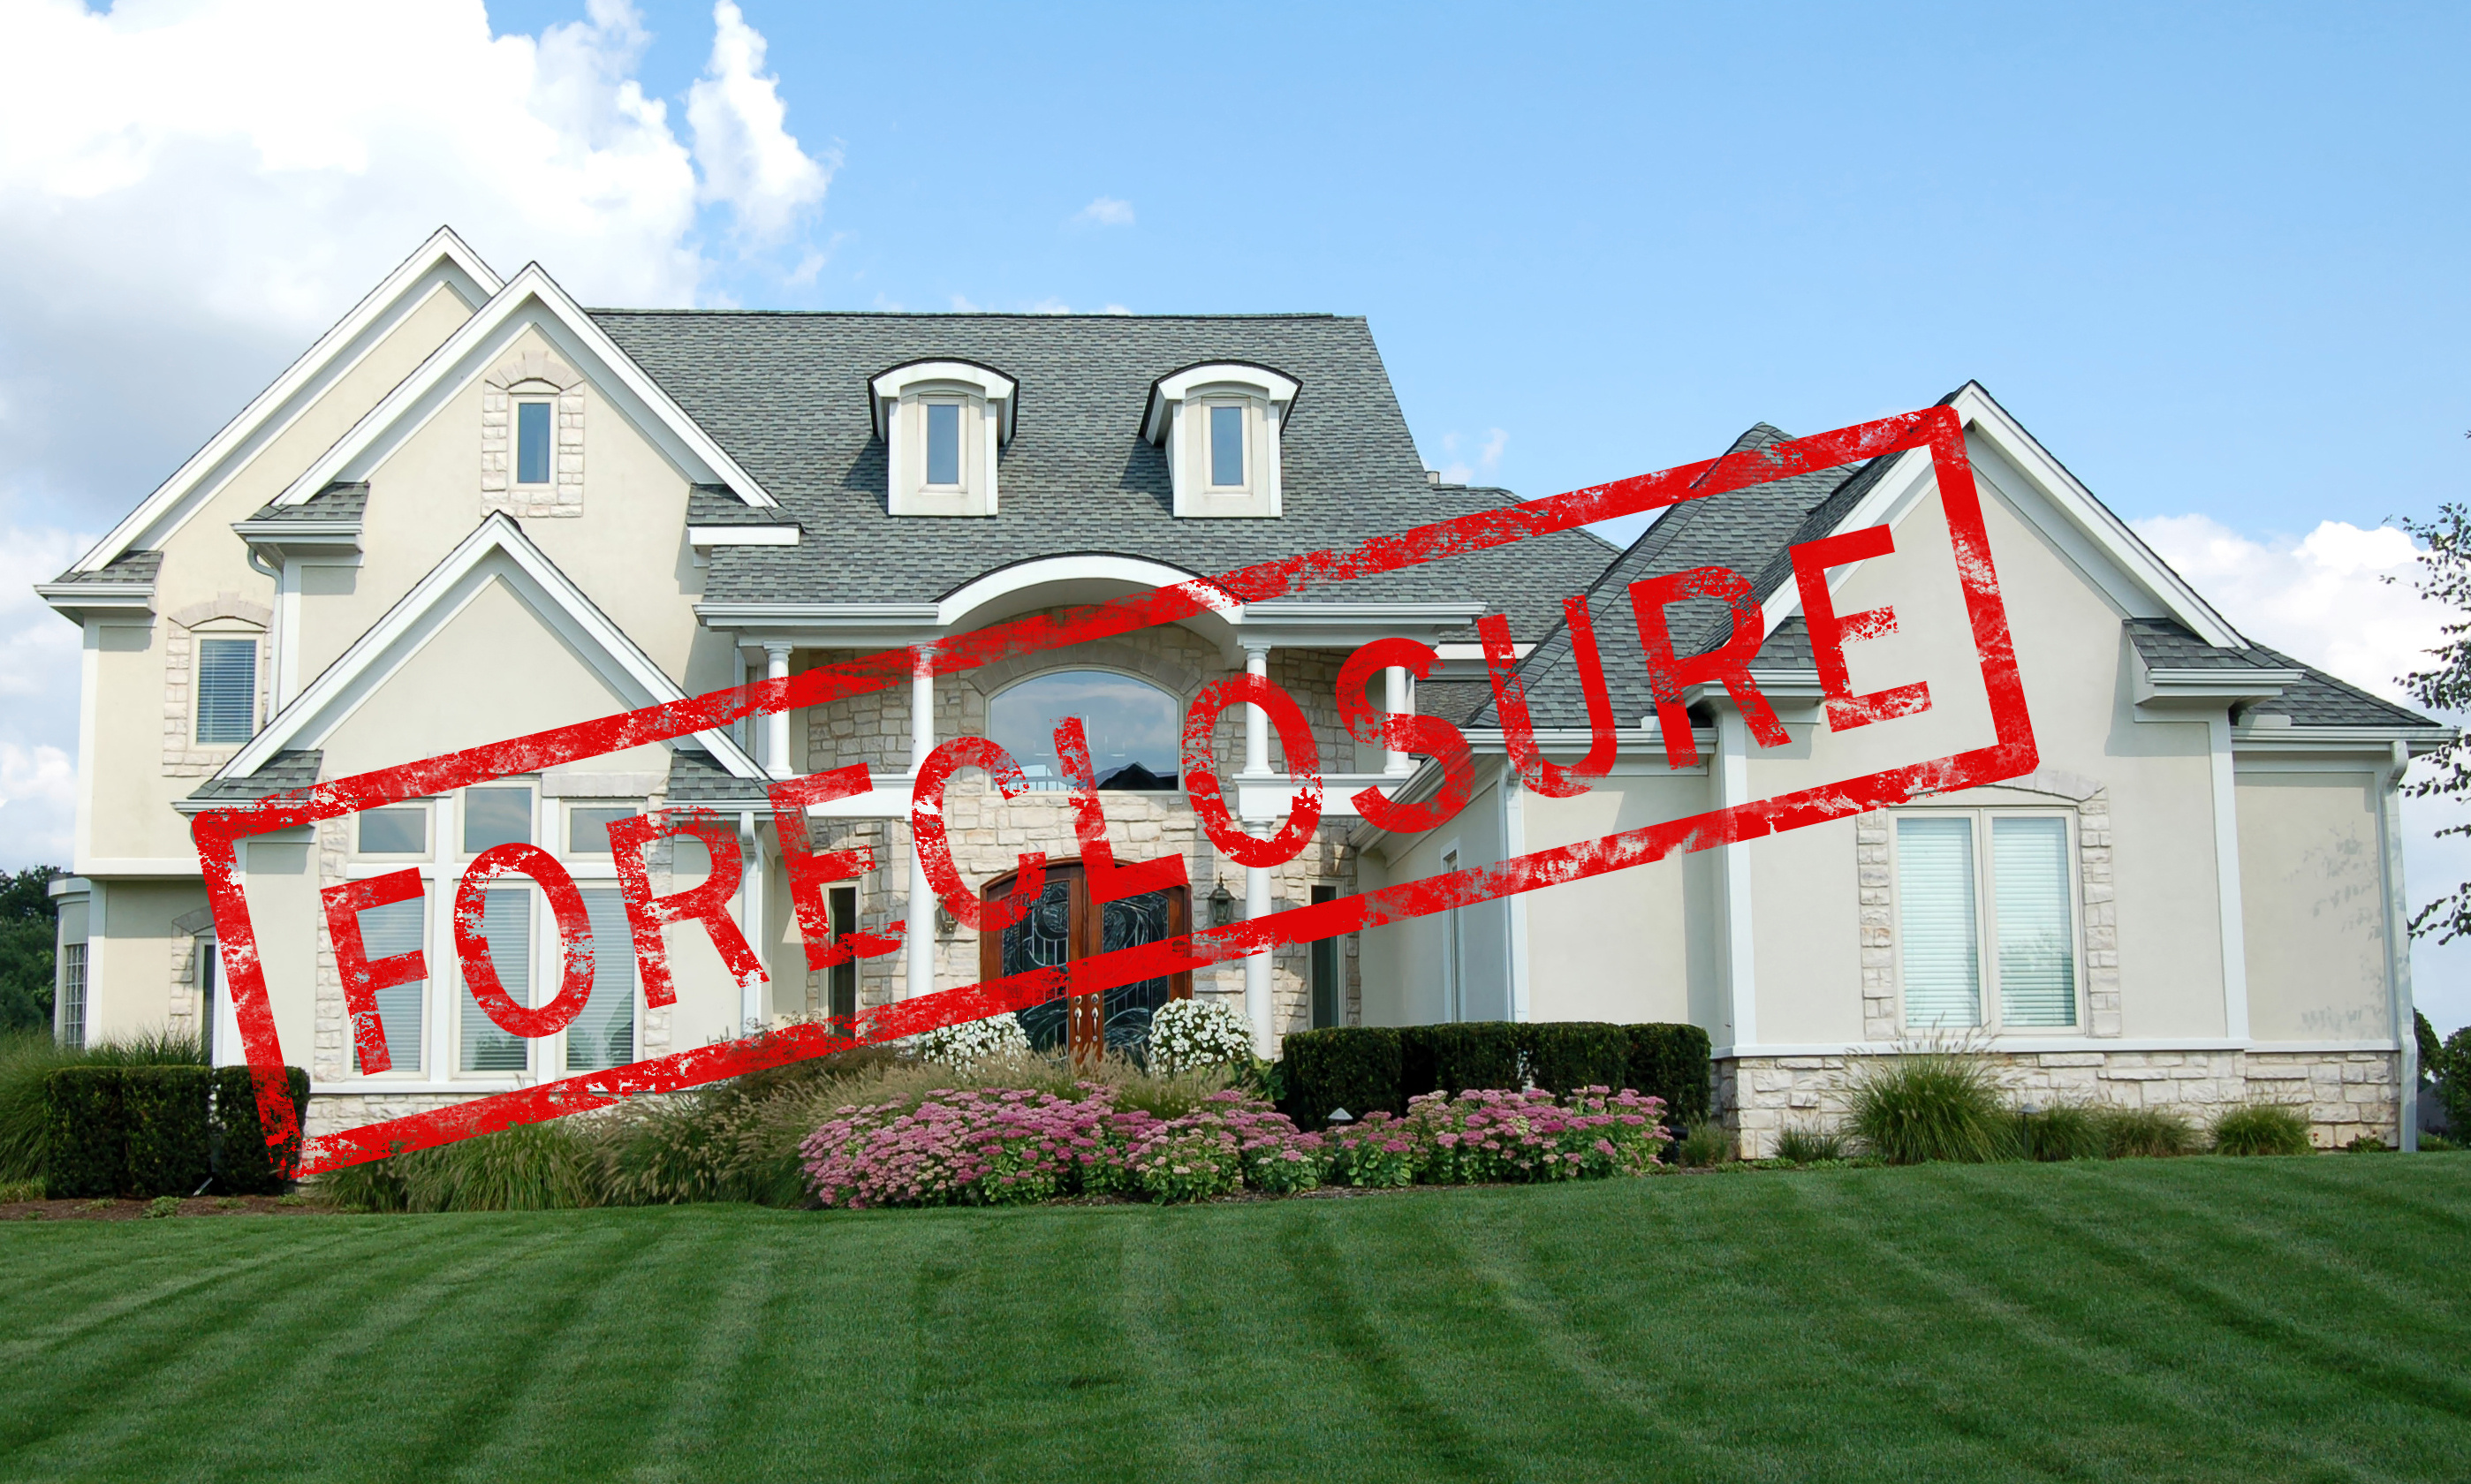 Call Allied Real Estate Appraisers to discuss valuations for Genesee foreclosures